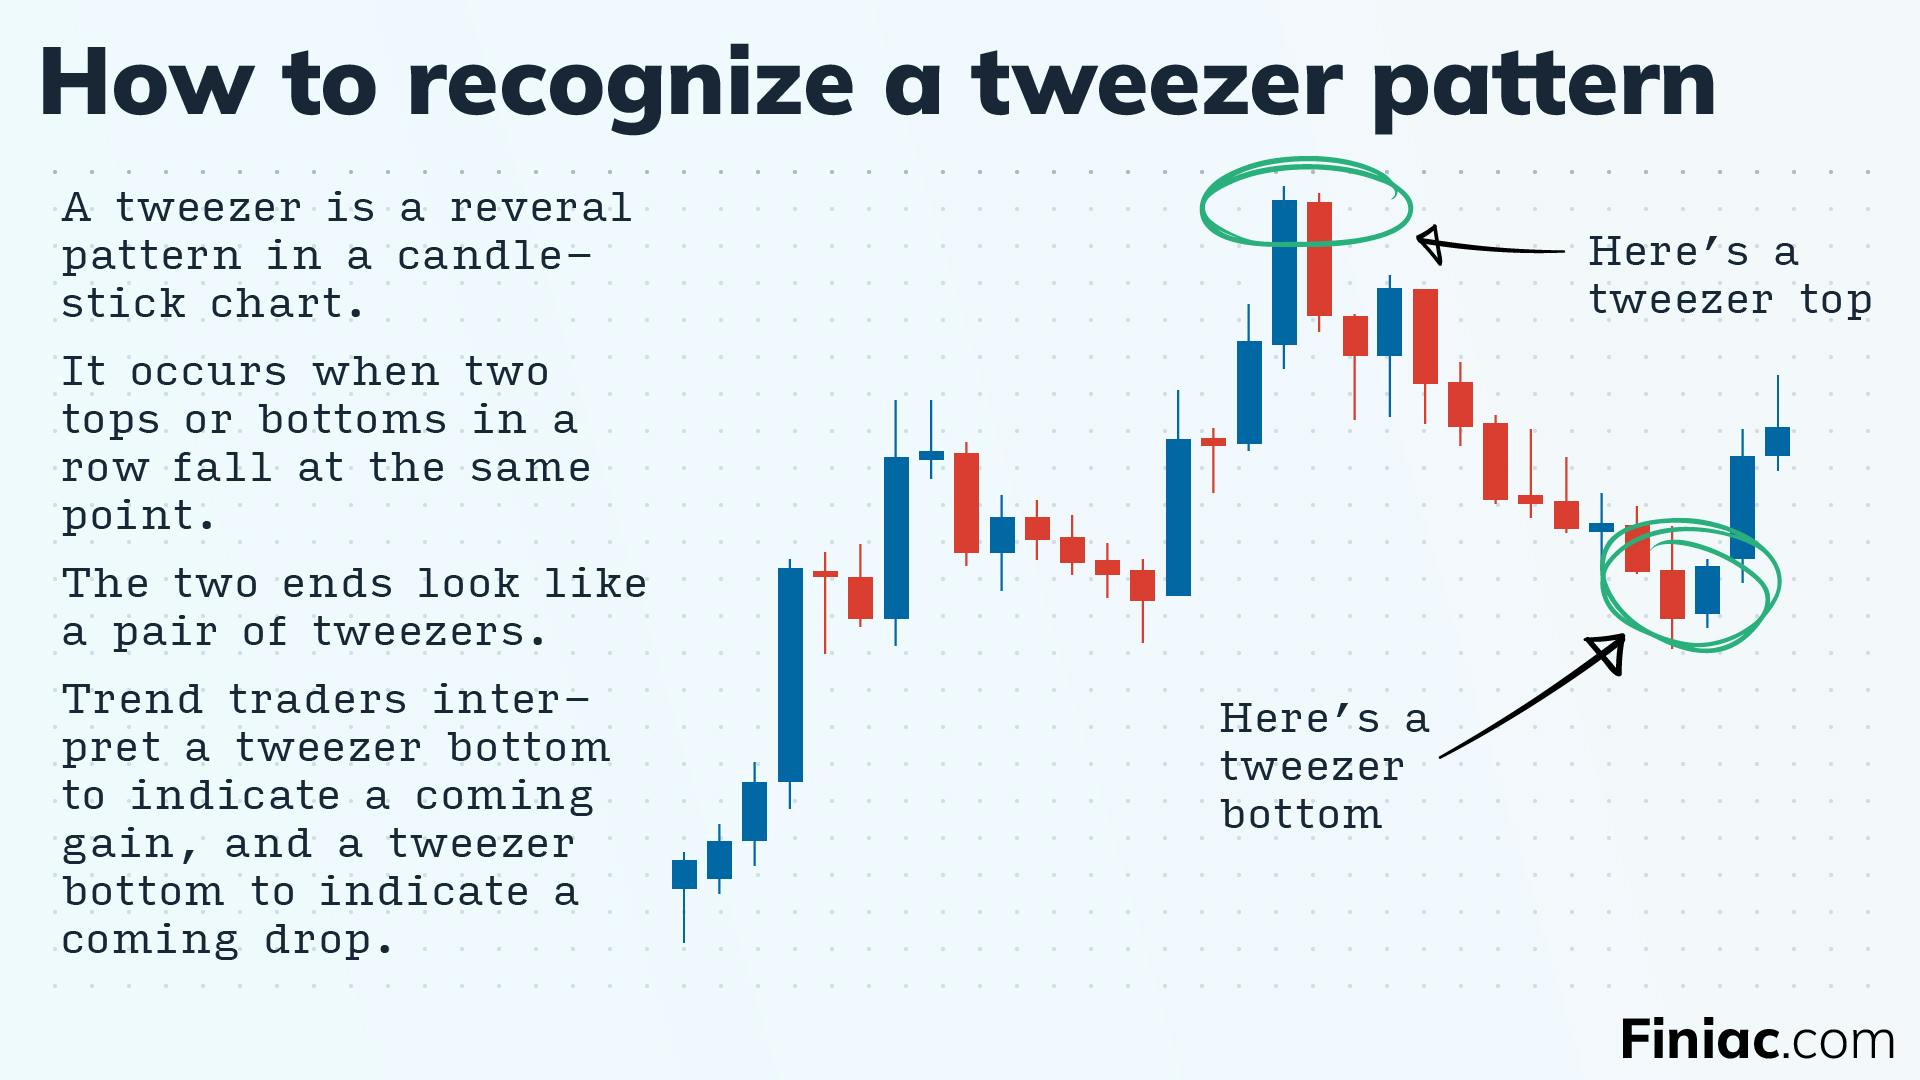 Infographic explaining how to read a tweezer pattern in a candlestick chart.